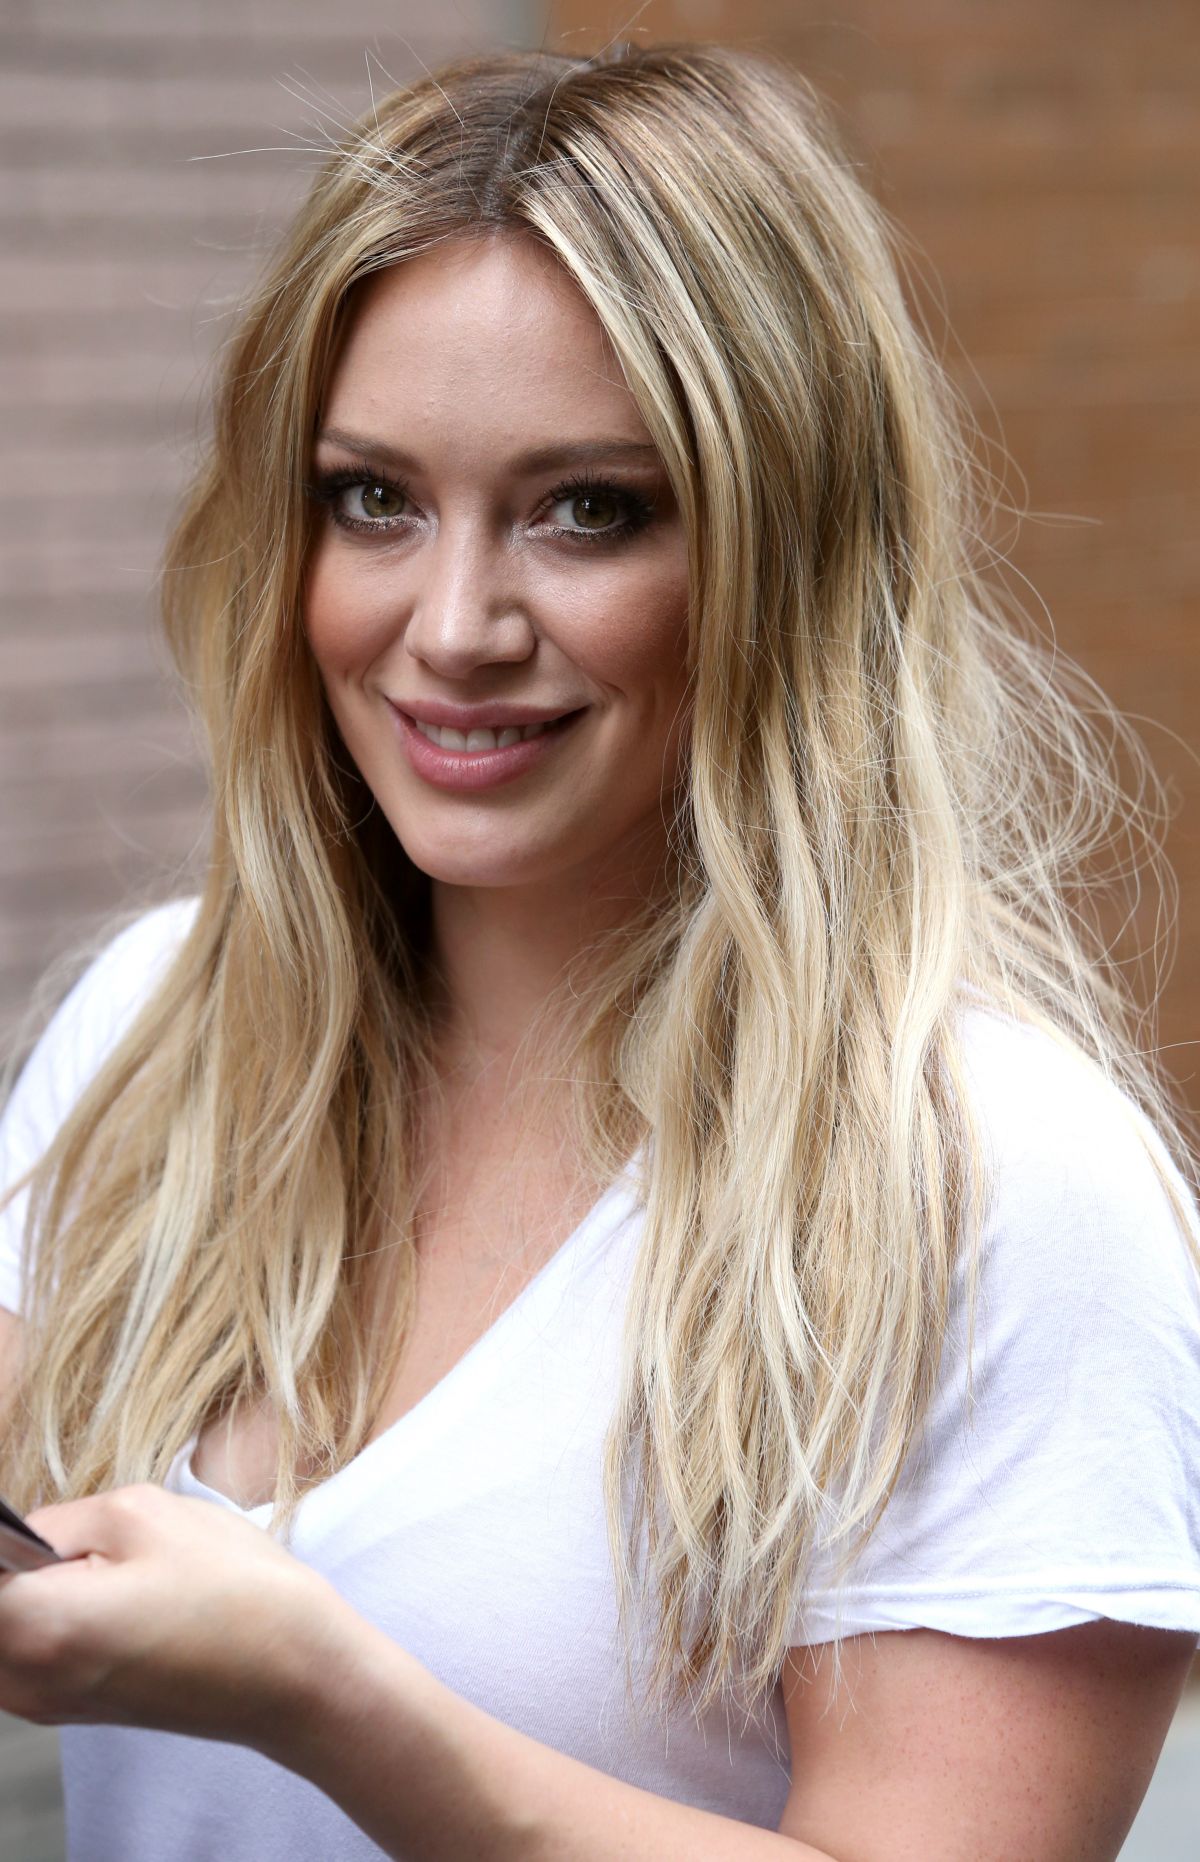 Hilary Duff Is Married! What to Know About Her Secret 